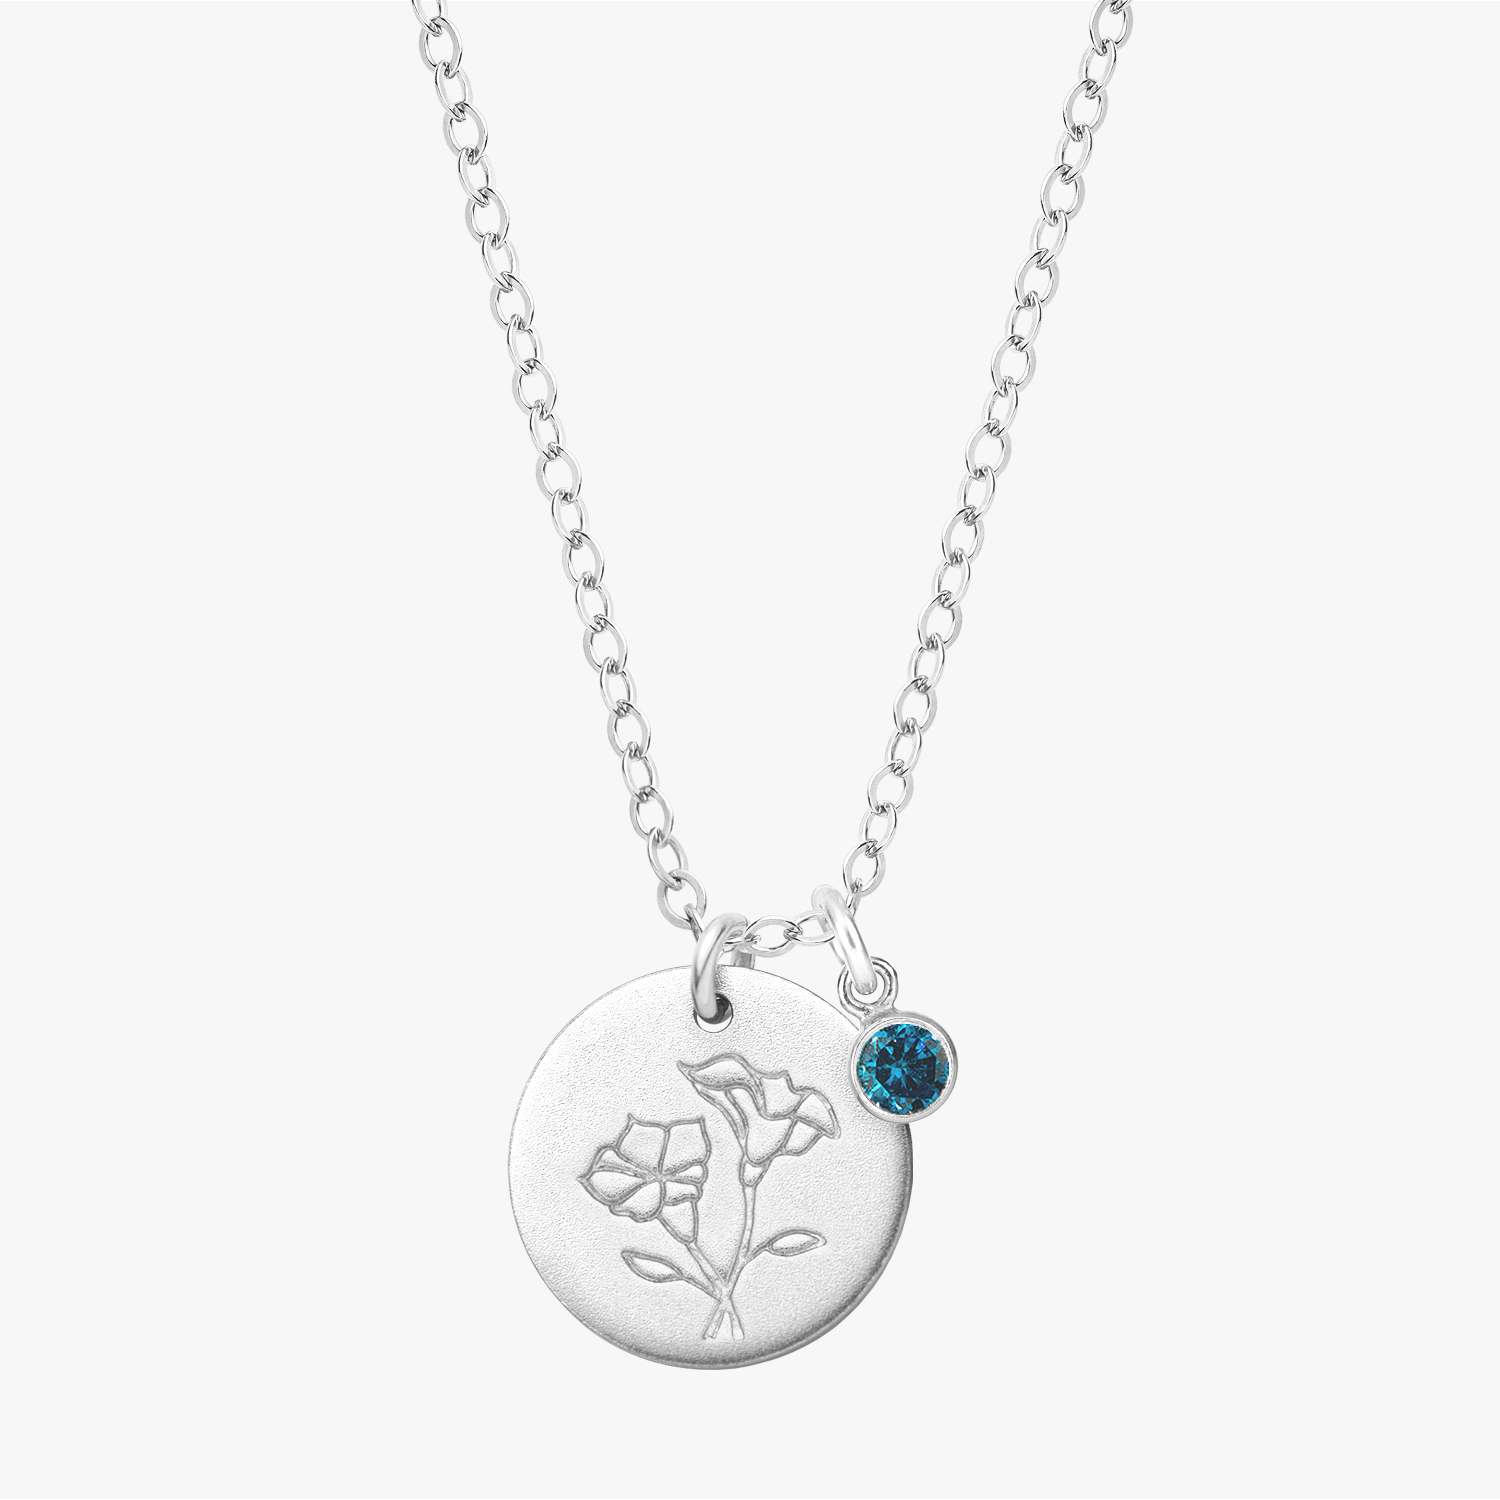 Personalized Birth Flower Initial Silver Necklace